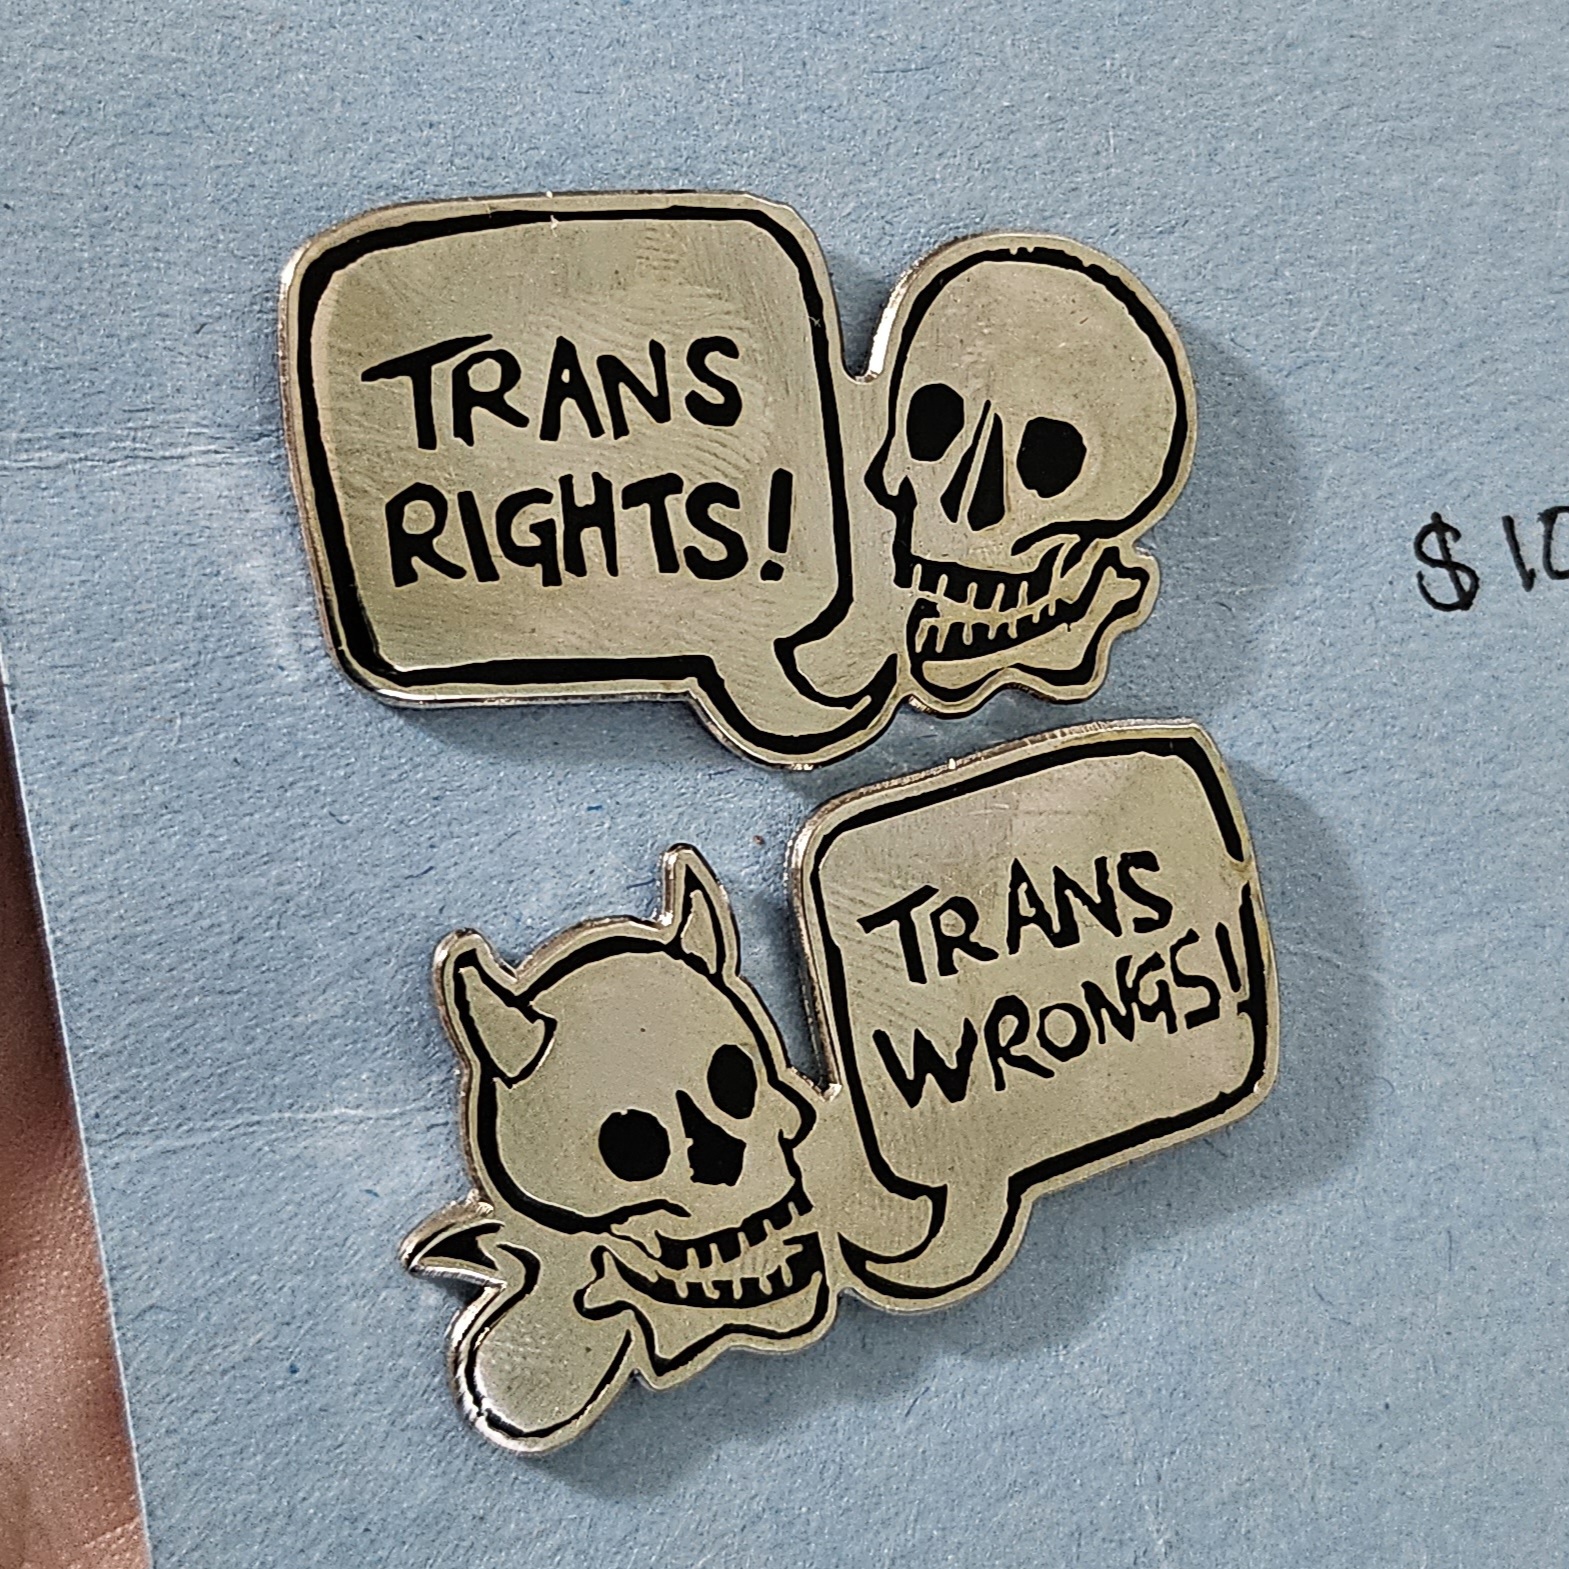 Two hard enamel pins in my trans rights and trans wrongs skulls designs.